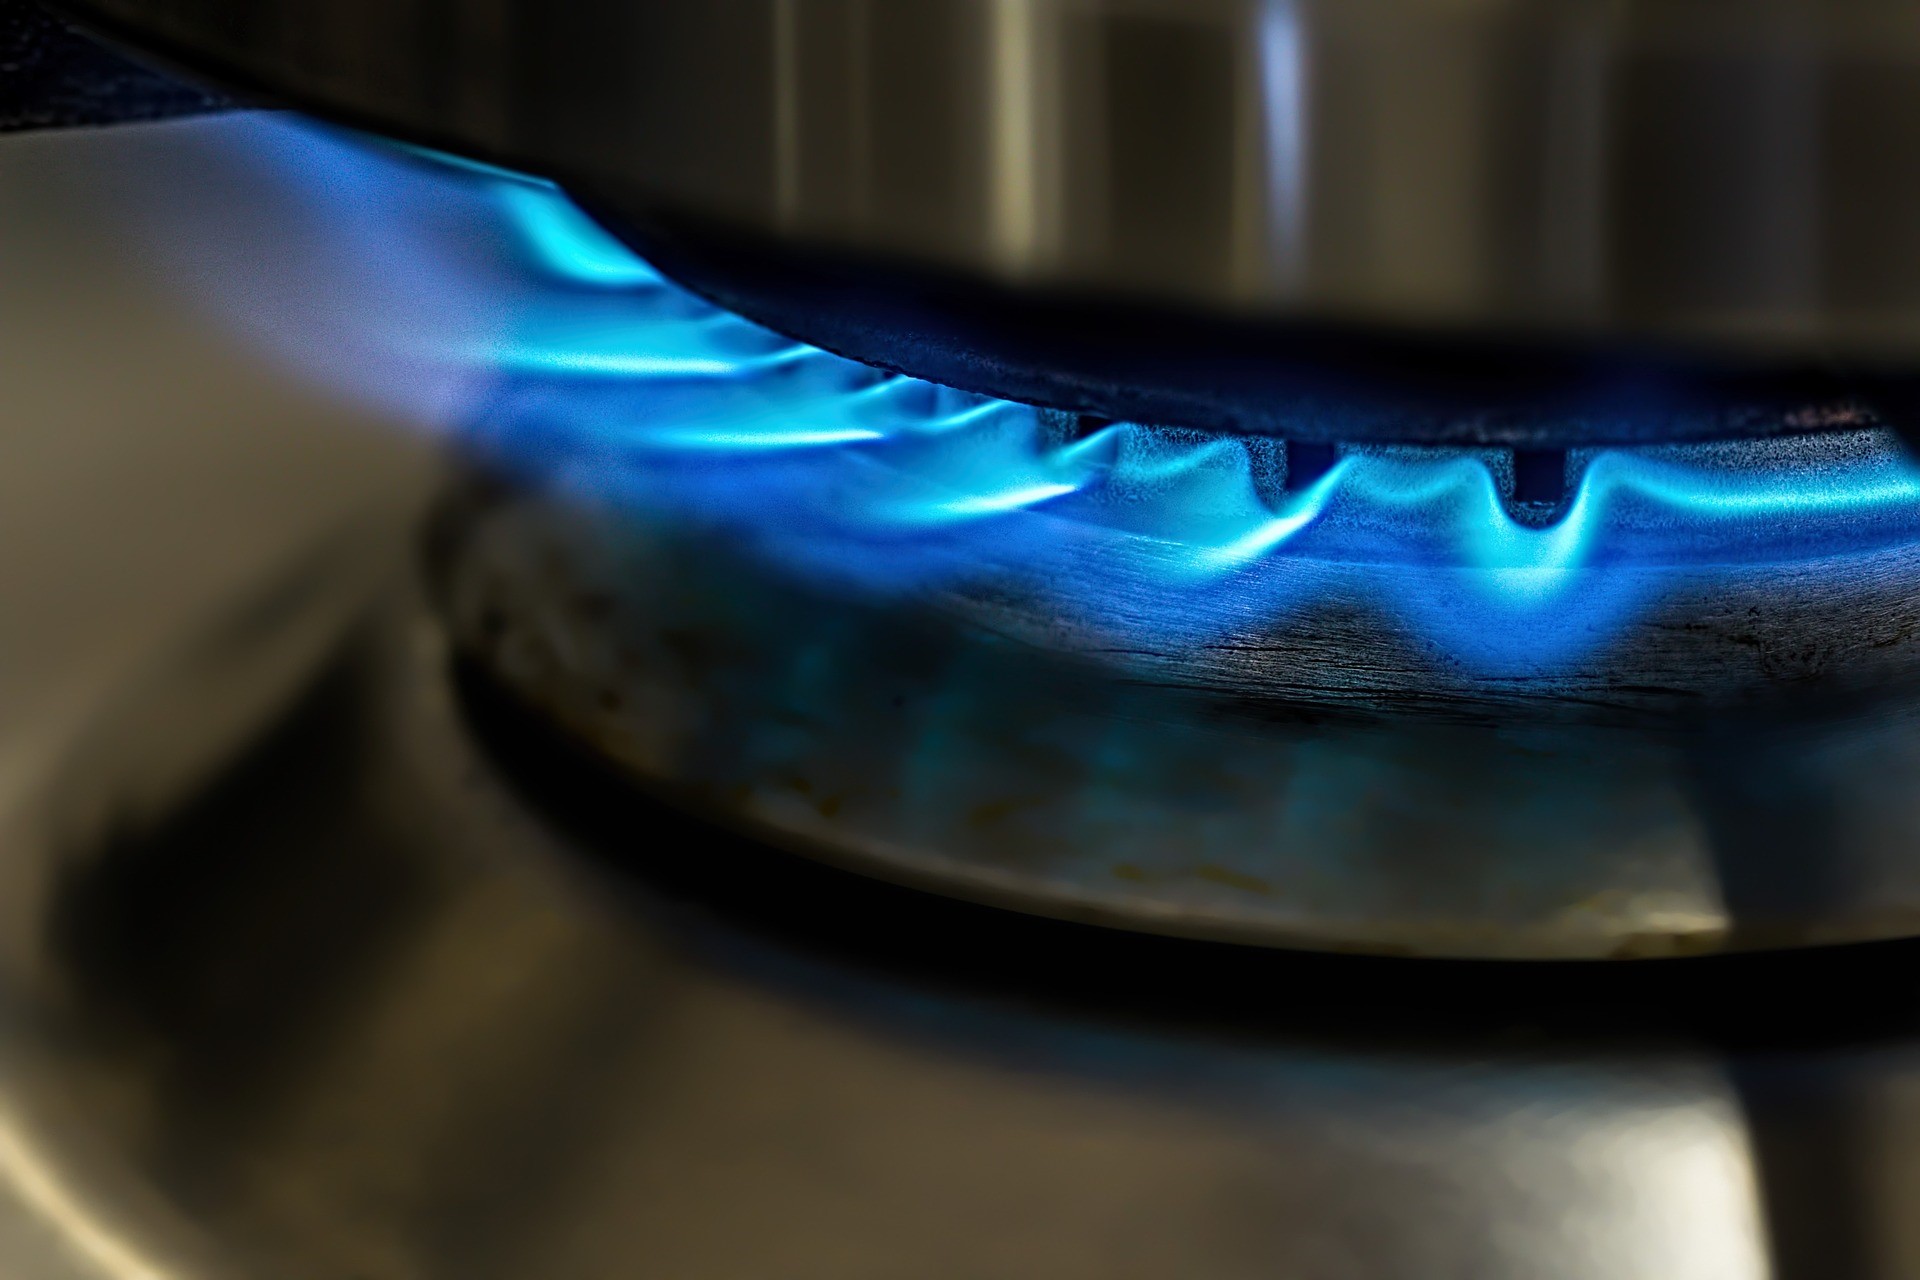 How to avoid the biggest household energy rises for a decade